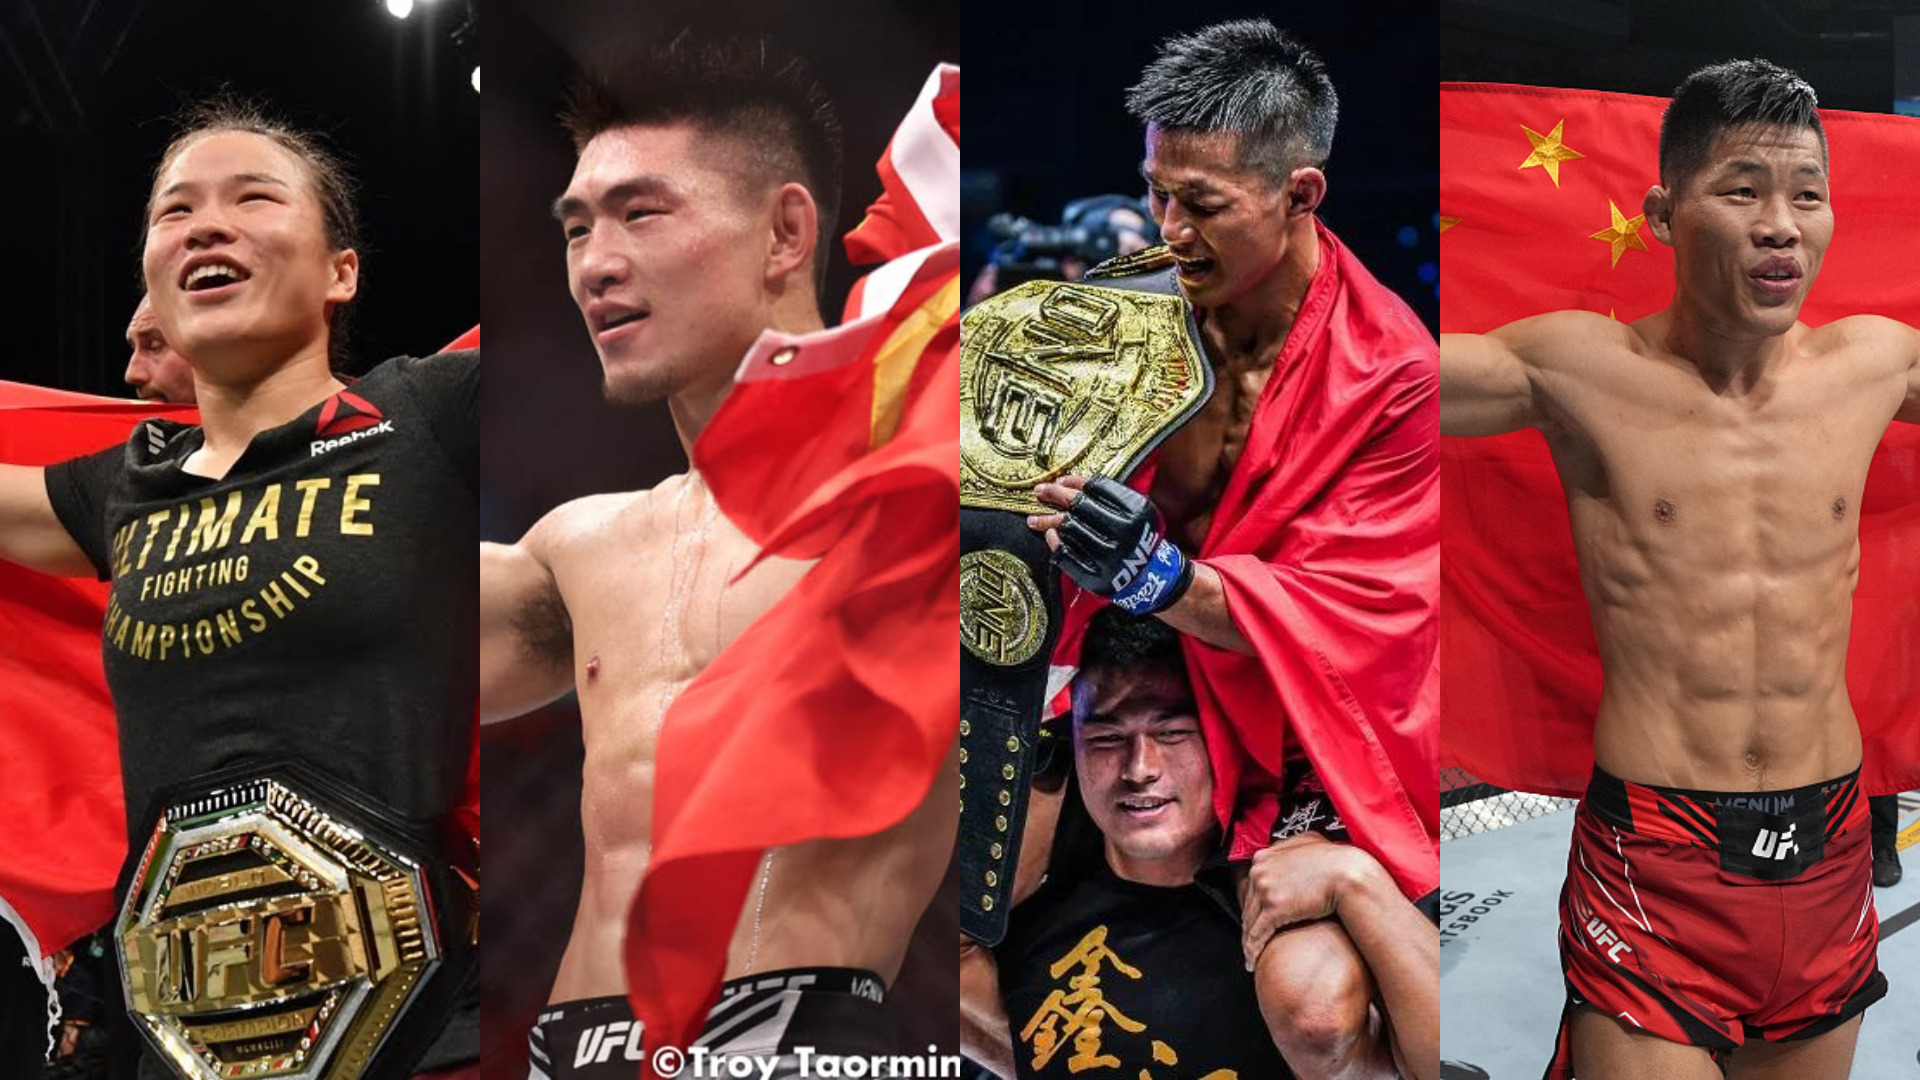 https://mmasucka.com/wp-content/uploads/2022/09/Chinese-MMA-Fighters.png